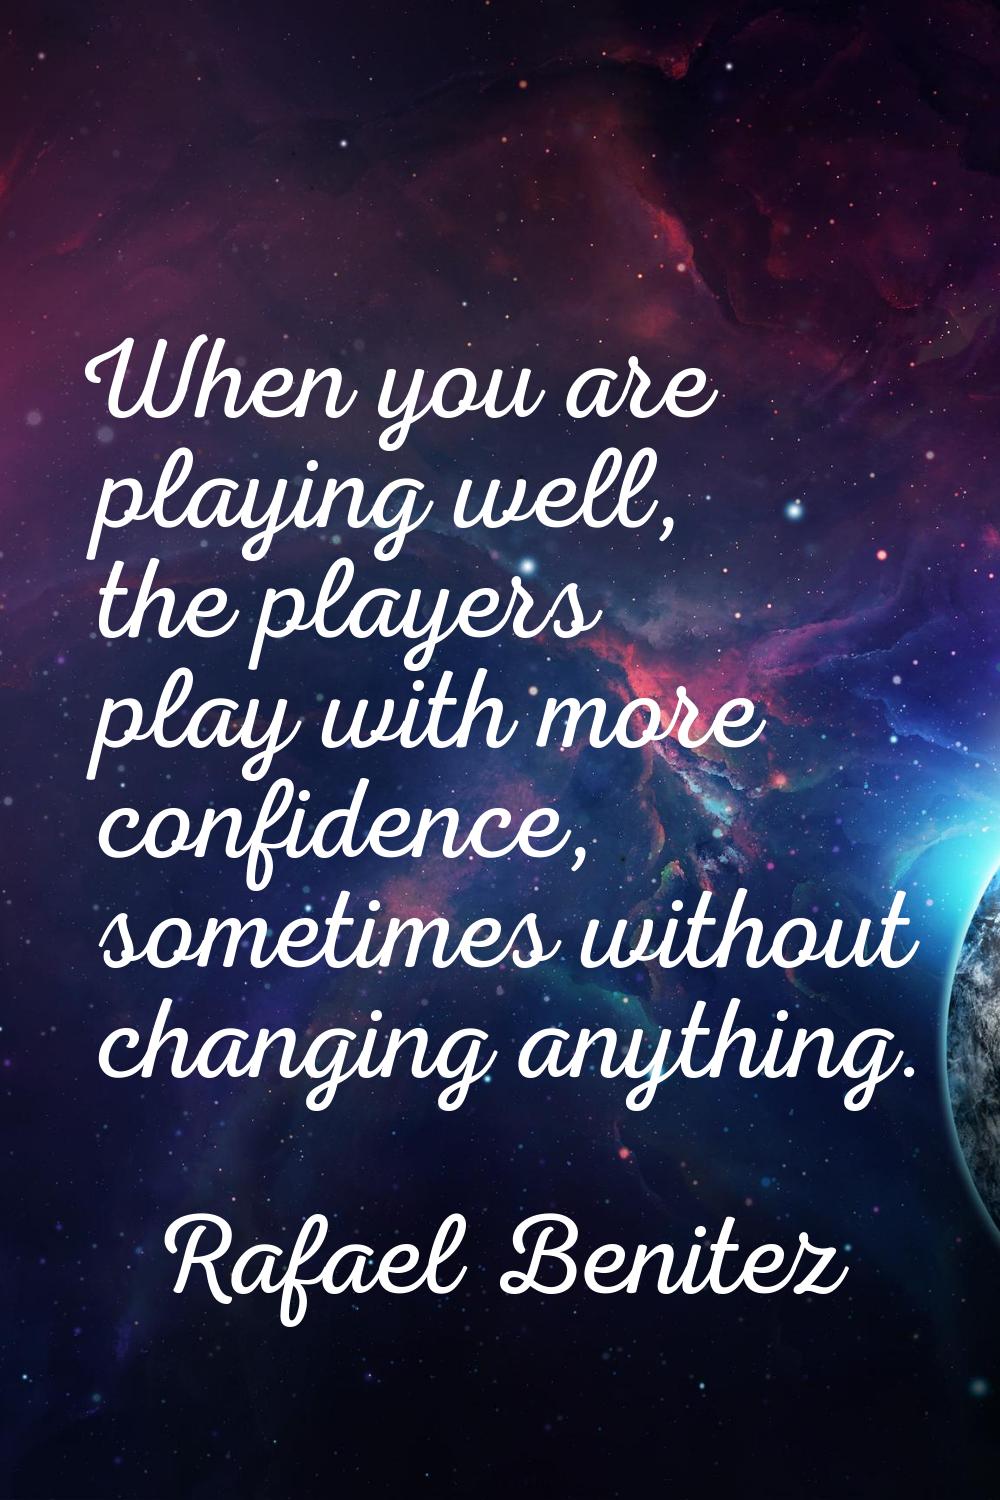 When you are playing well, the players play with more confidence, sometimes without changing anythi